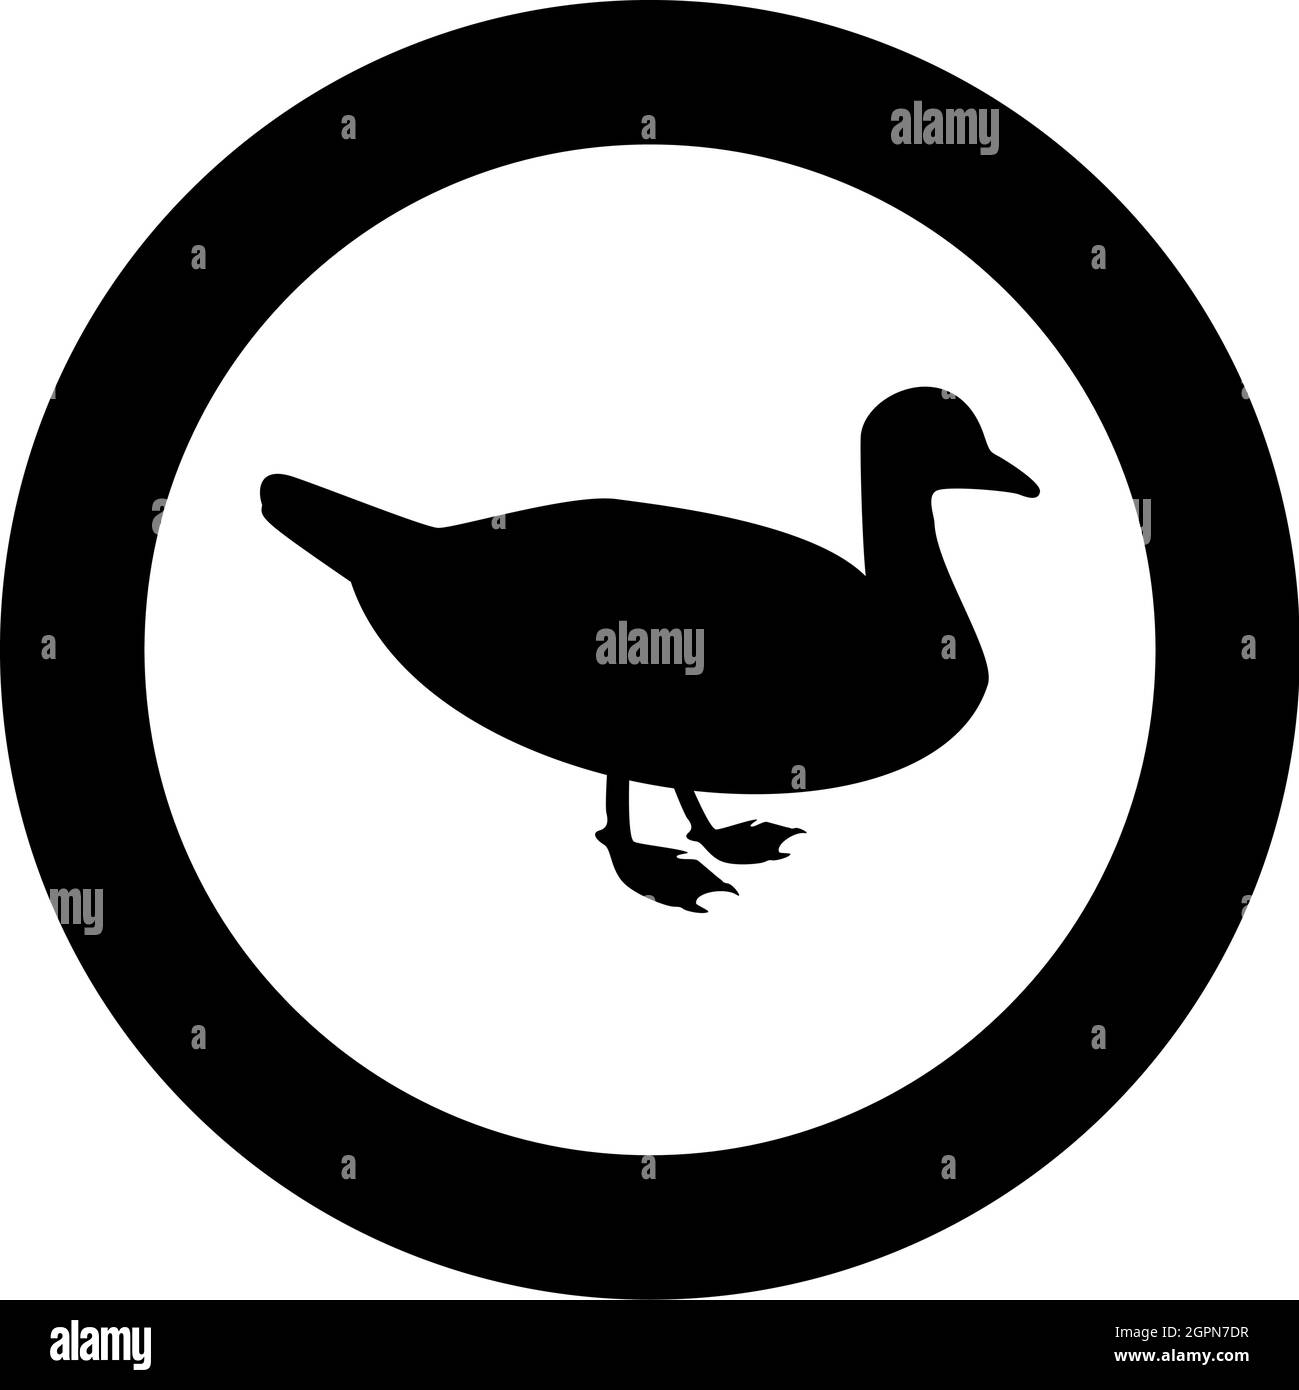 Duck Male mallard Bird Waterbird Waterfowl Poultry Fowl Canard silhouette in circle round black color vector illustration solid outline style image Stock Vector